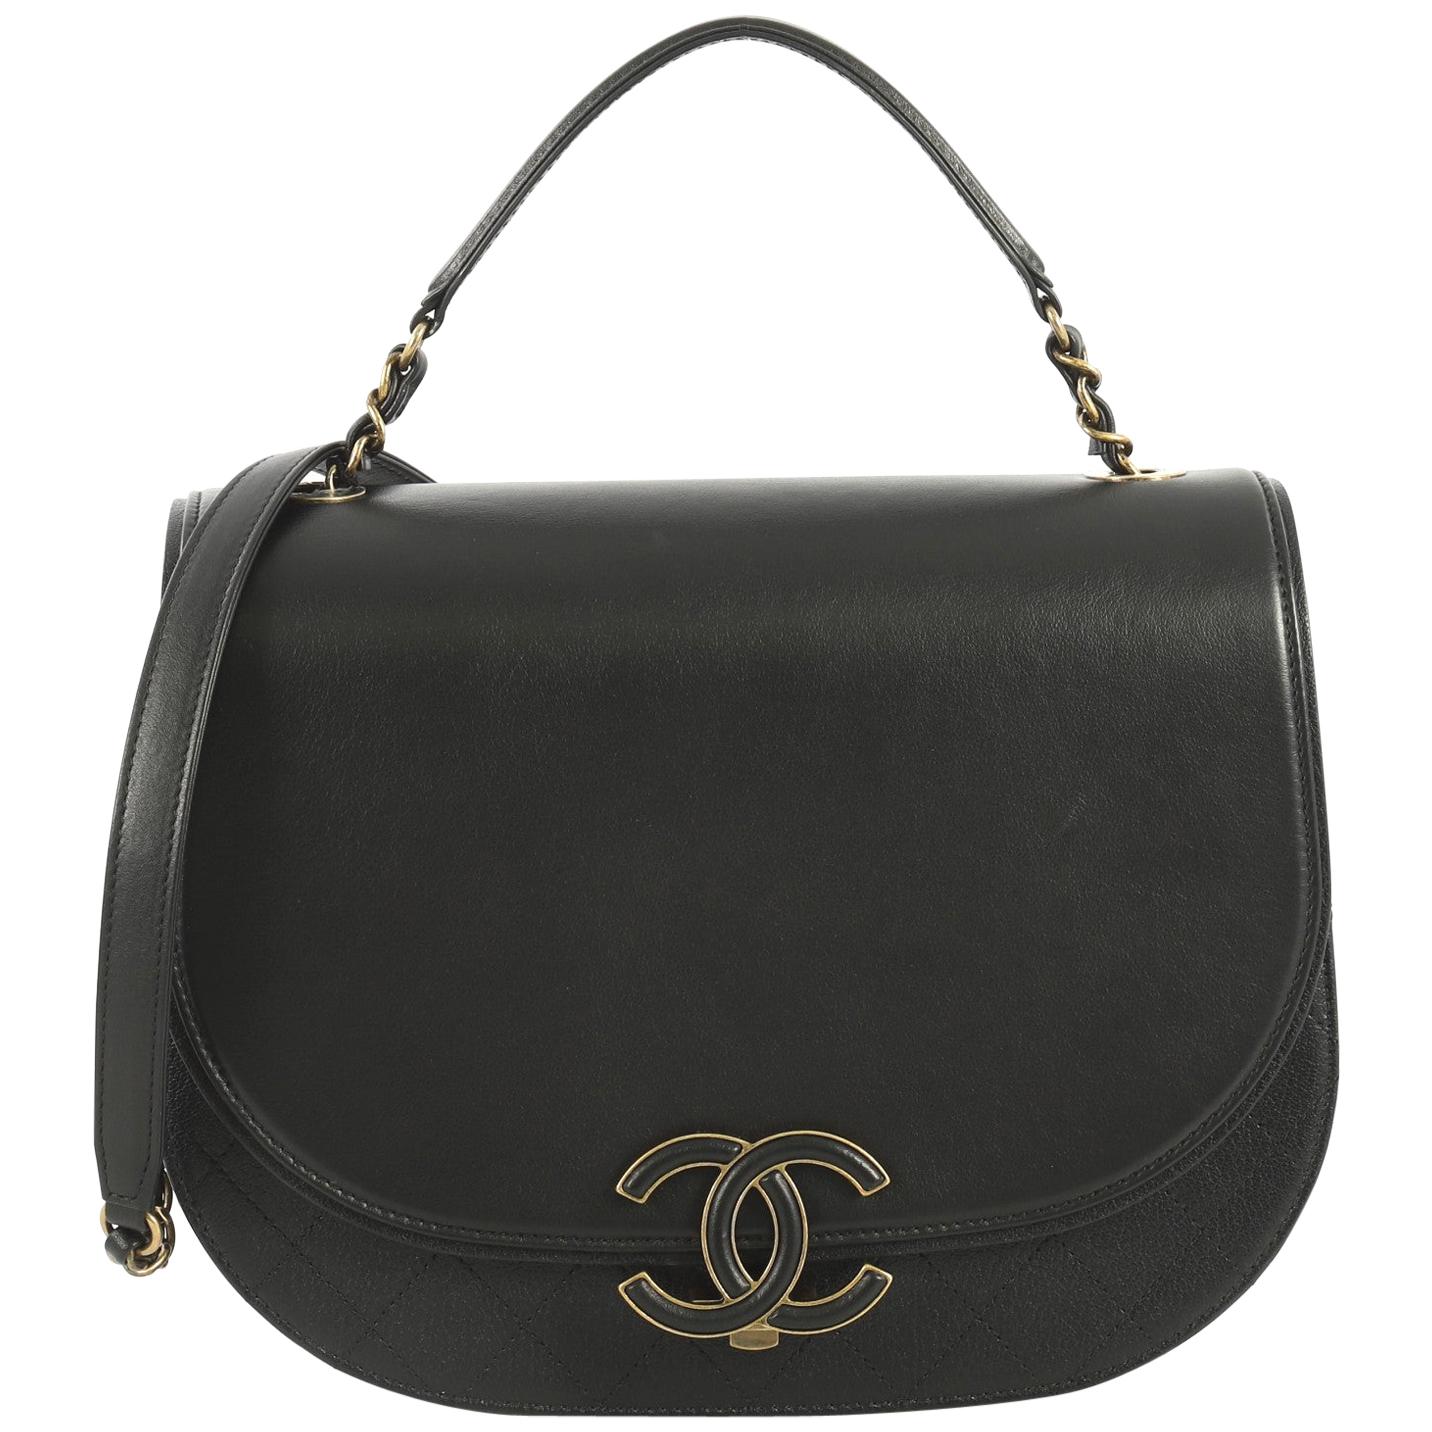 coco chanel bags new small